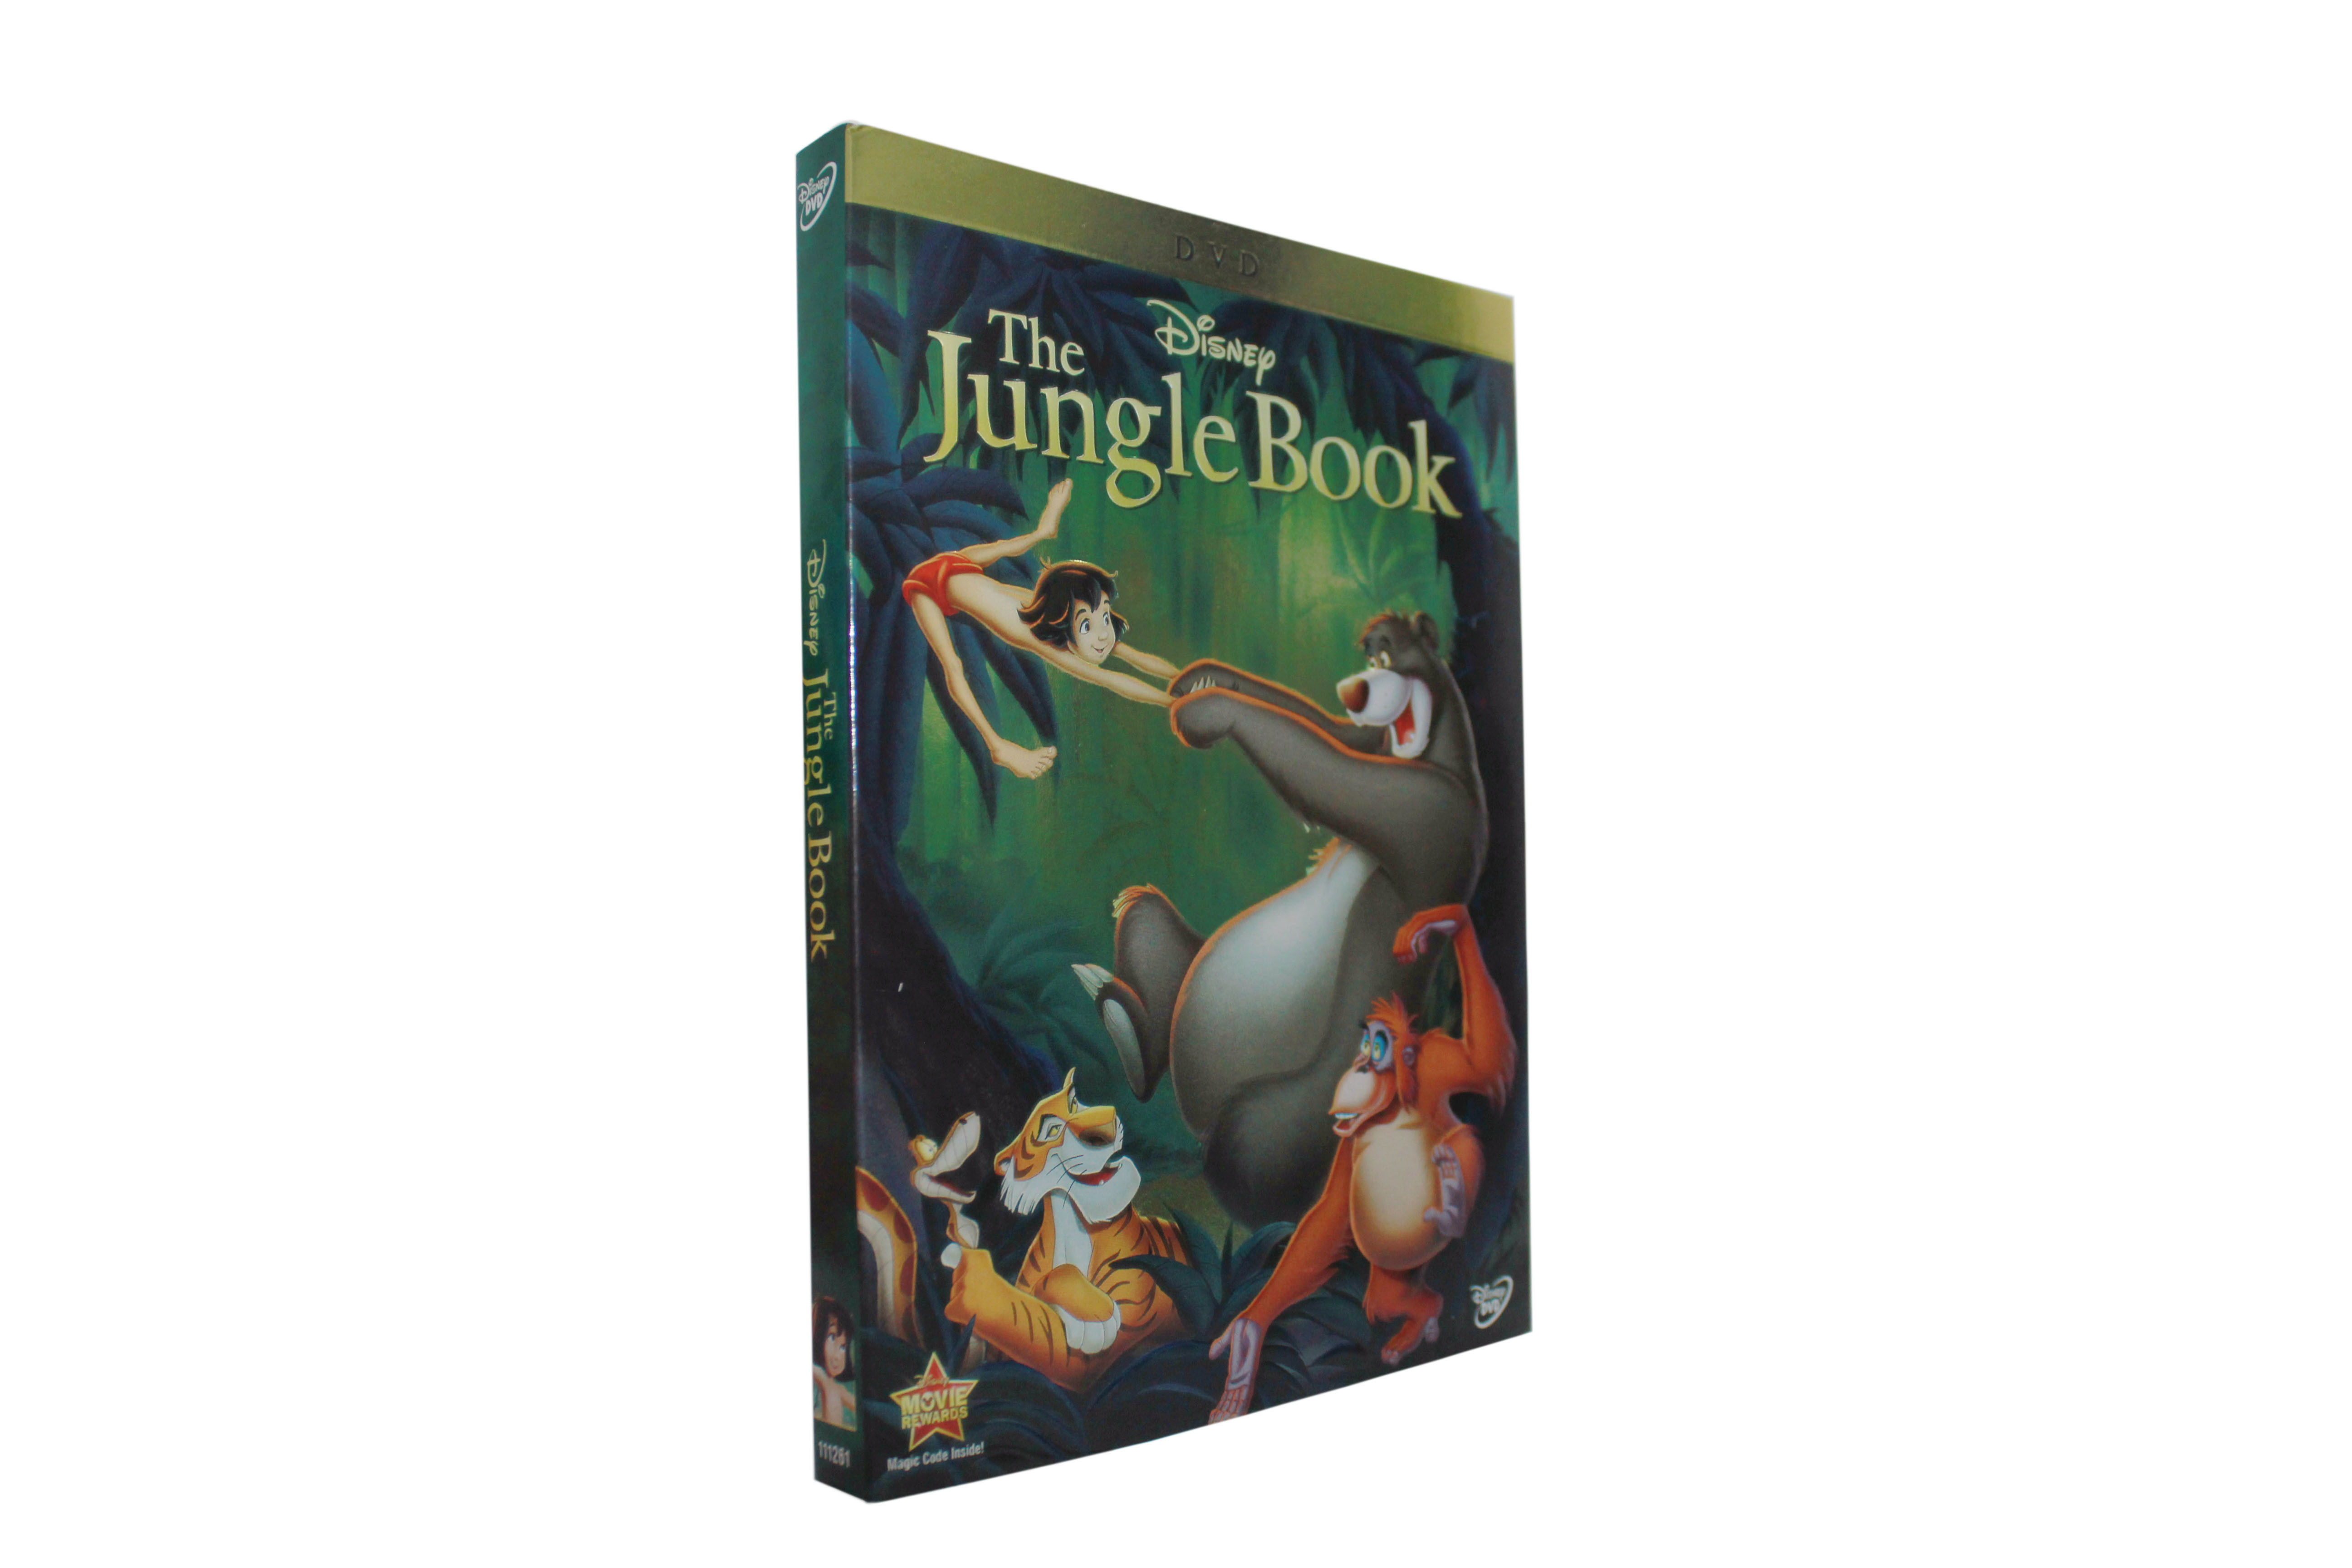 China Free DHL Shipping@New Release HOT Cartoon DVD Movies The Jungle Book New 2017 Wholesale,Brand New factory sealed! factory